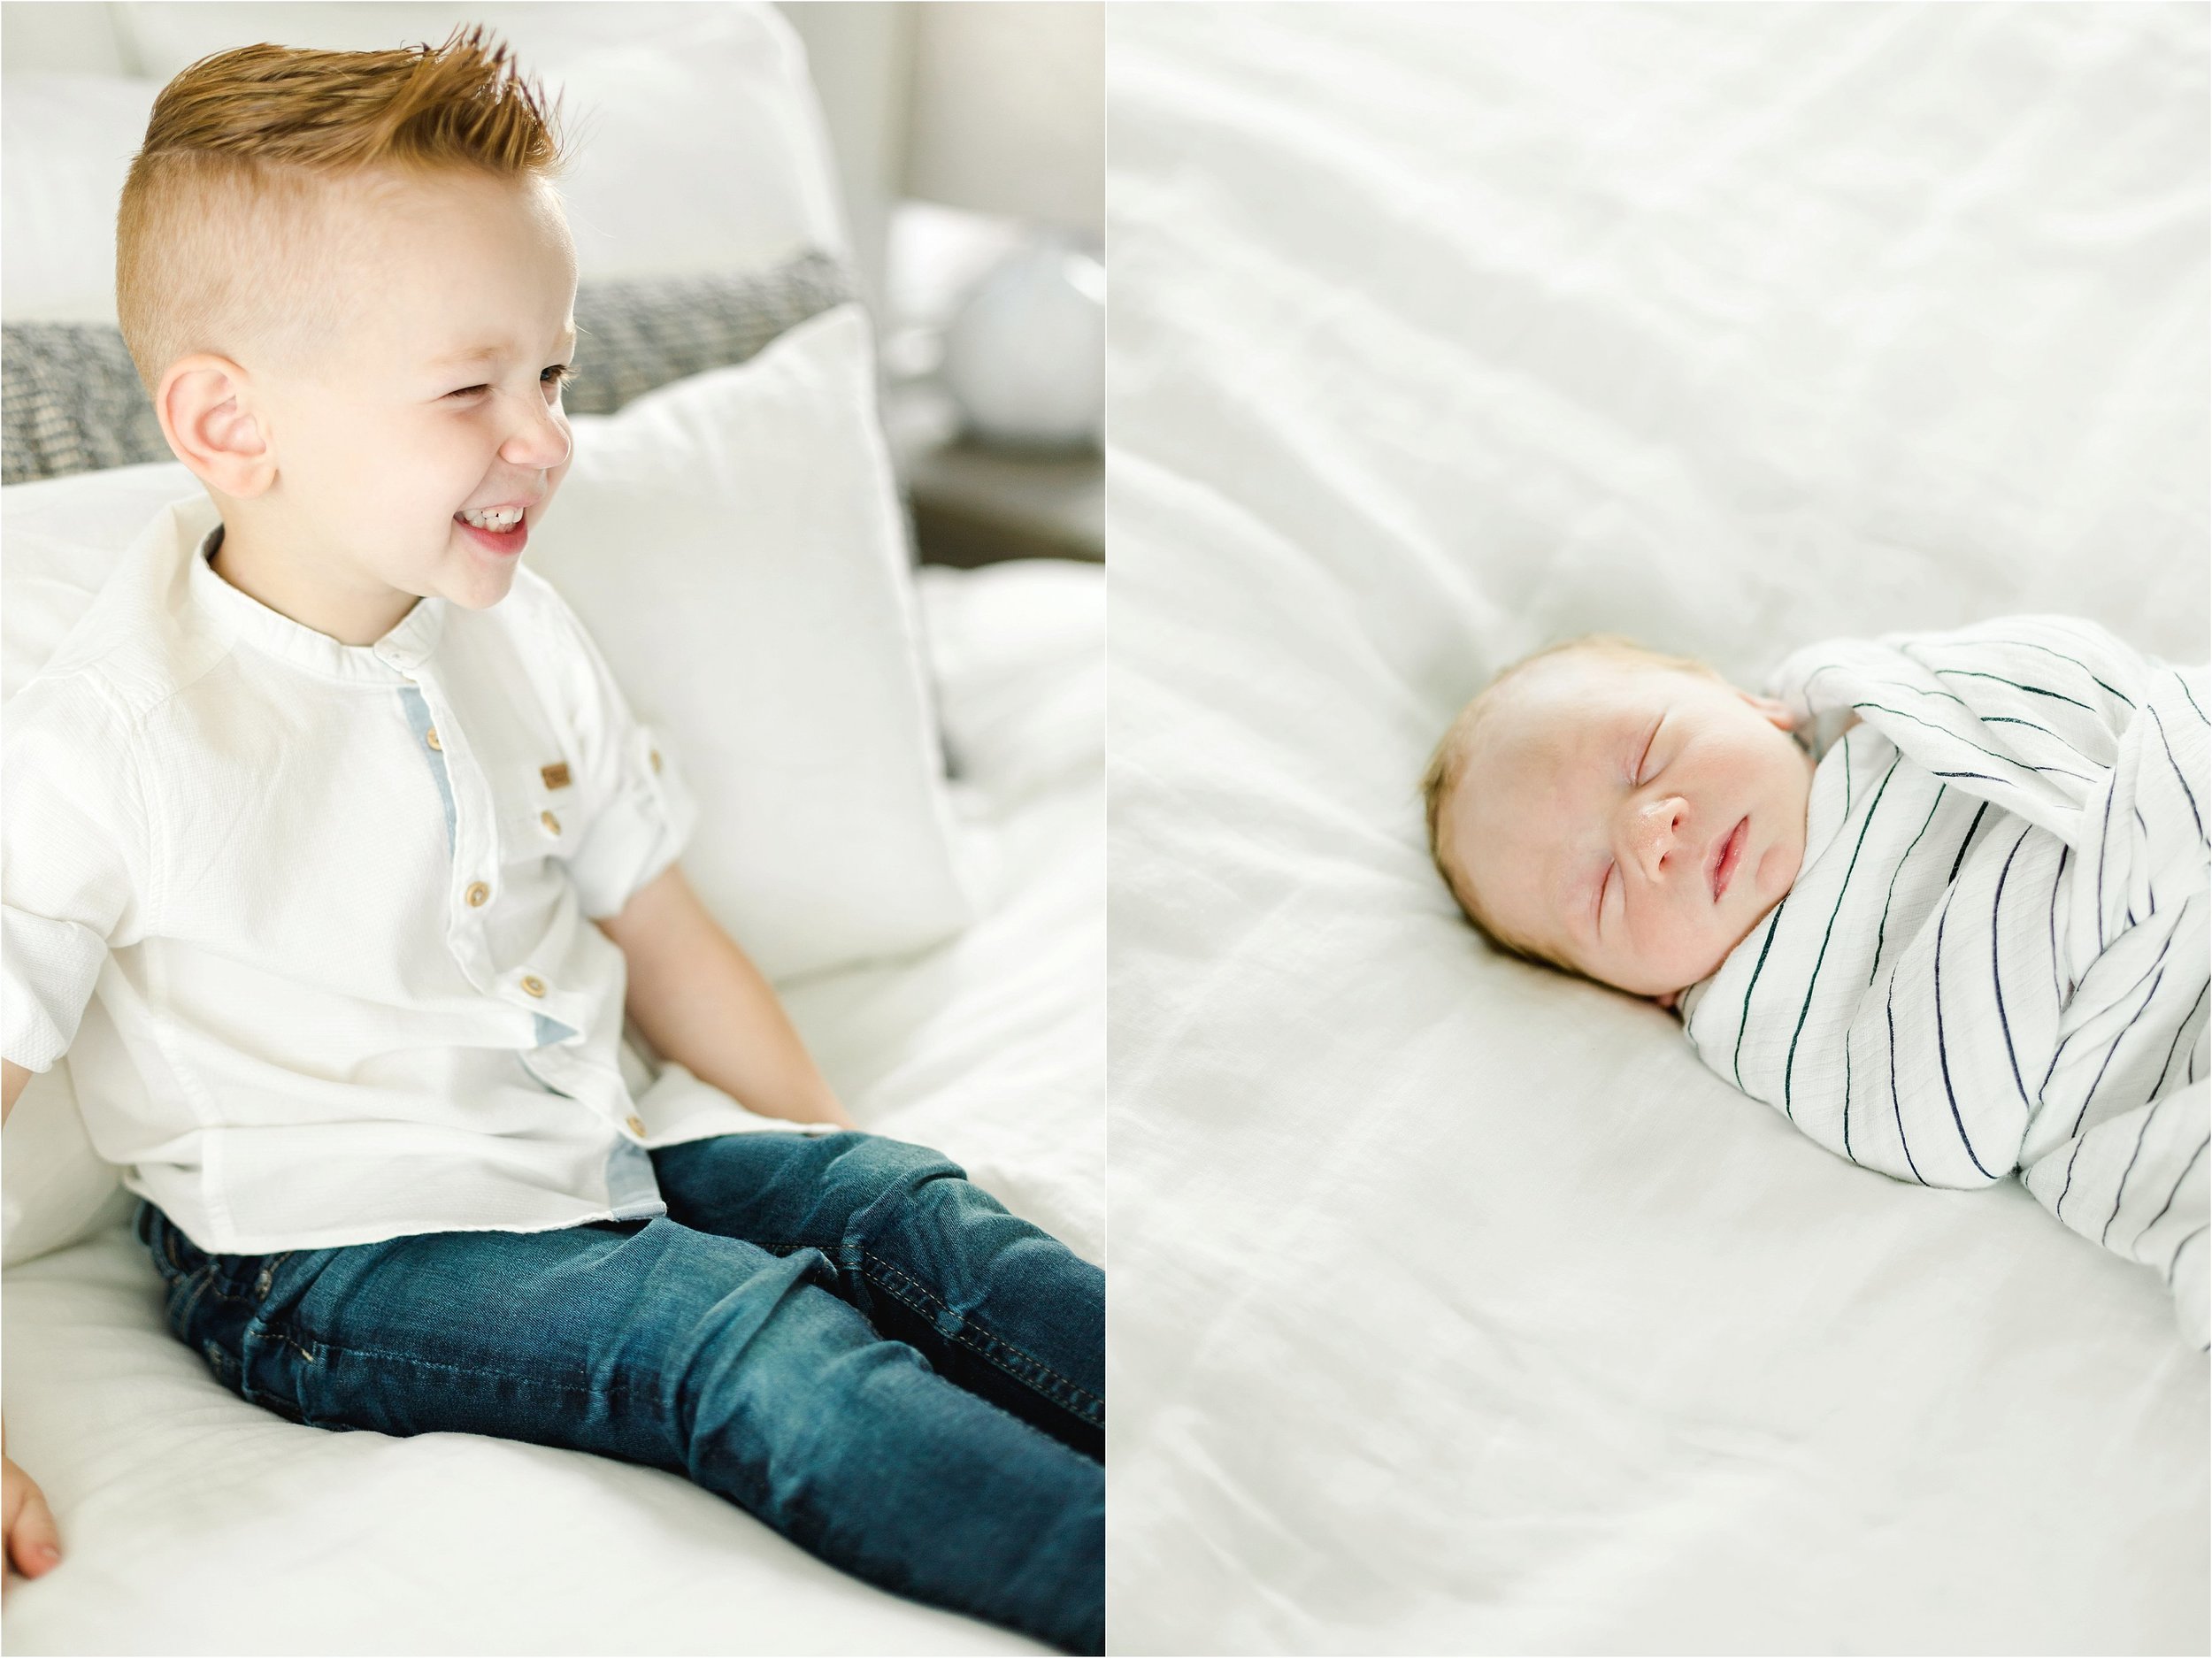 Image on the left shows red-headed toddler brother sitting on a bed.  Image on the right shows the baby boy sleeping while swaddled in a black and white stripped swaddle.